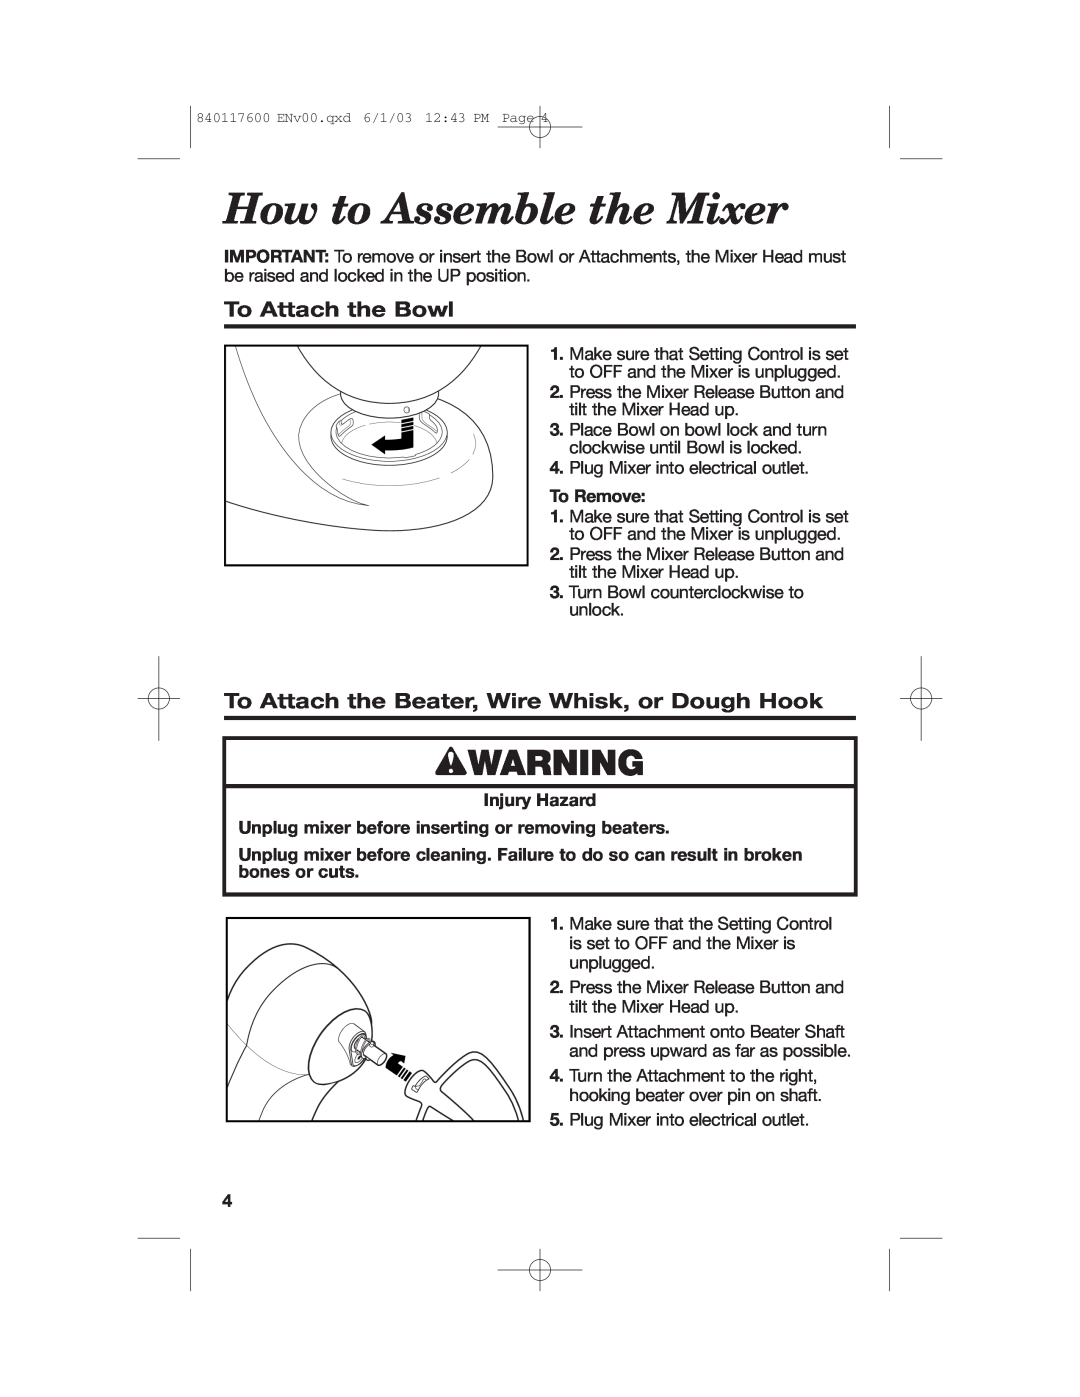 Hamilton Beach 840117600 manual How to Assemble the Mixer, wWARNING, To Attach the Bowl, To Remove, Injury Hazard 